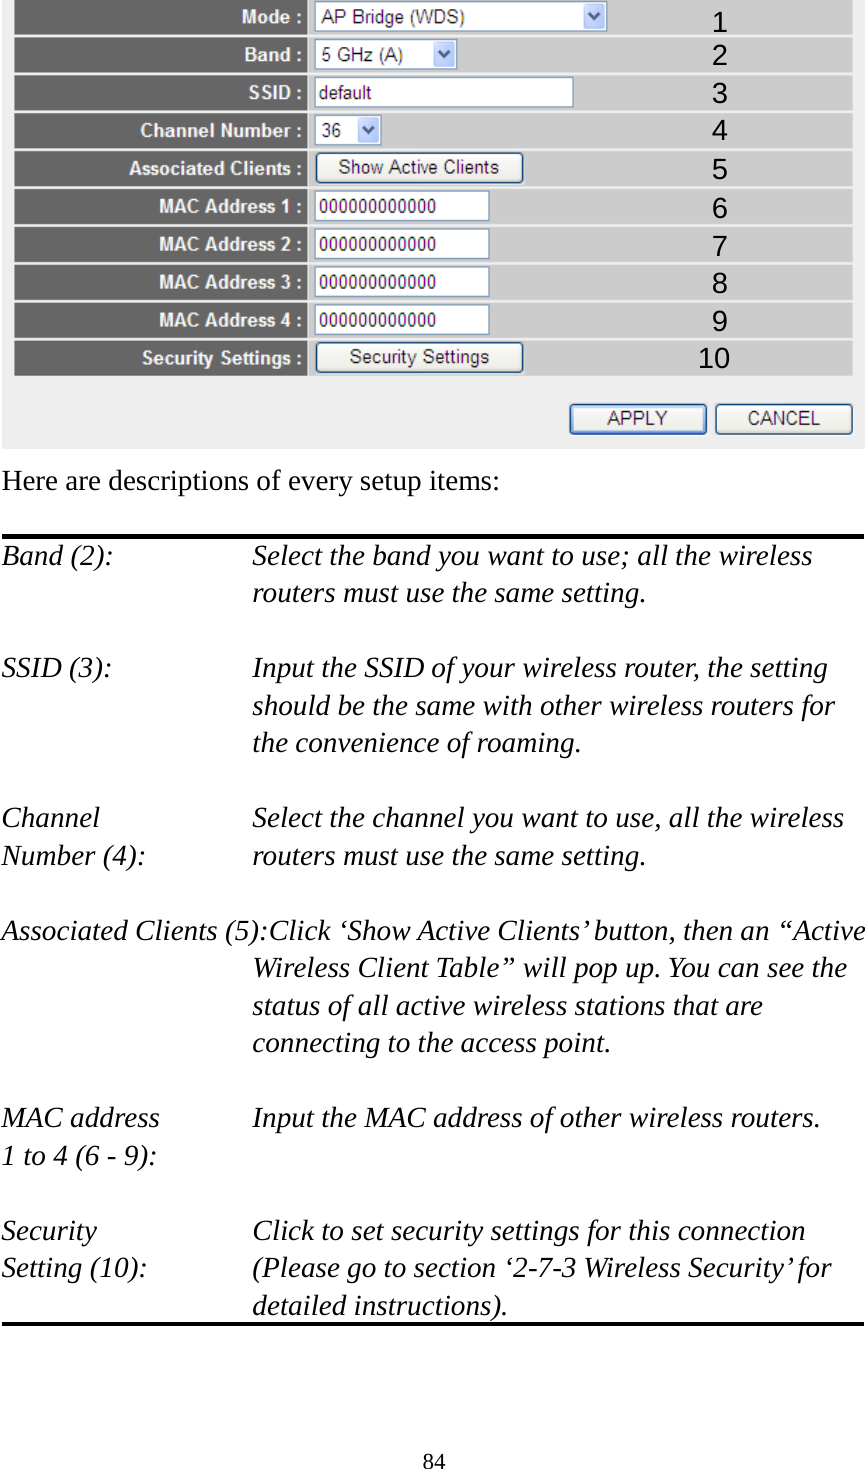 84  Here are descriptions of every setup items:  Band (2):  Select the band you want to use; all the wireless routers must use the same setting.  SSID (3):  Input the SSID of your wireless router, the setting should be the same with other wireless routers for the convenience of roaming.  Channel Select the channel you want to use, all the wireless Number (4):  routers must use the same setting.  Associated Clients (5):Click ‘Show Active Clients’ button, then an “Active Wireless Client Table” will pop up. You can see the status of all active wireless stations that are connecting to the access point.  MAC address   Input the MAC address of other wireless routers. 1 to 4 (6 - 9):    Security    Click to set security settings for this connection Setting (10):  (Please go to section ‘2-7-3 Wireless Security’ for detailed instructions).   1 2 3 4 5 7 8 6 9 10 